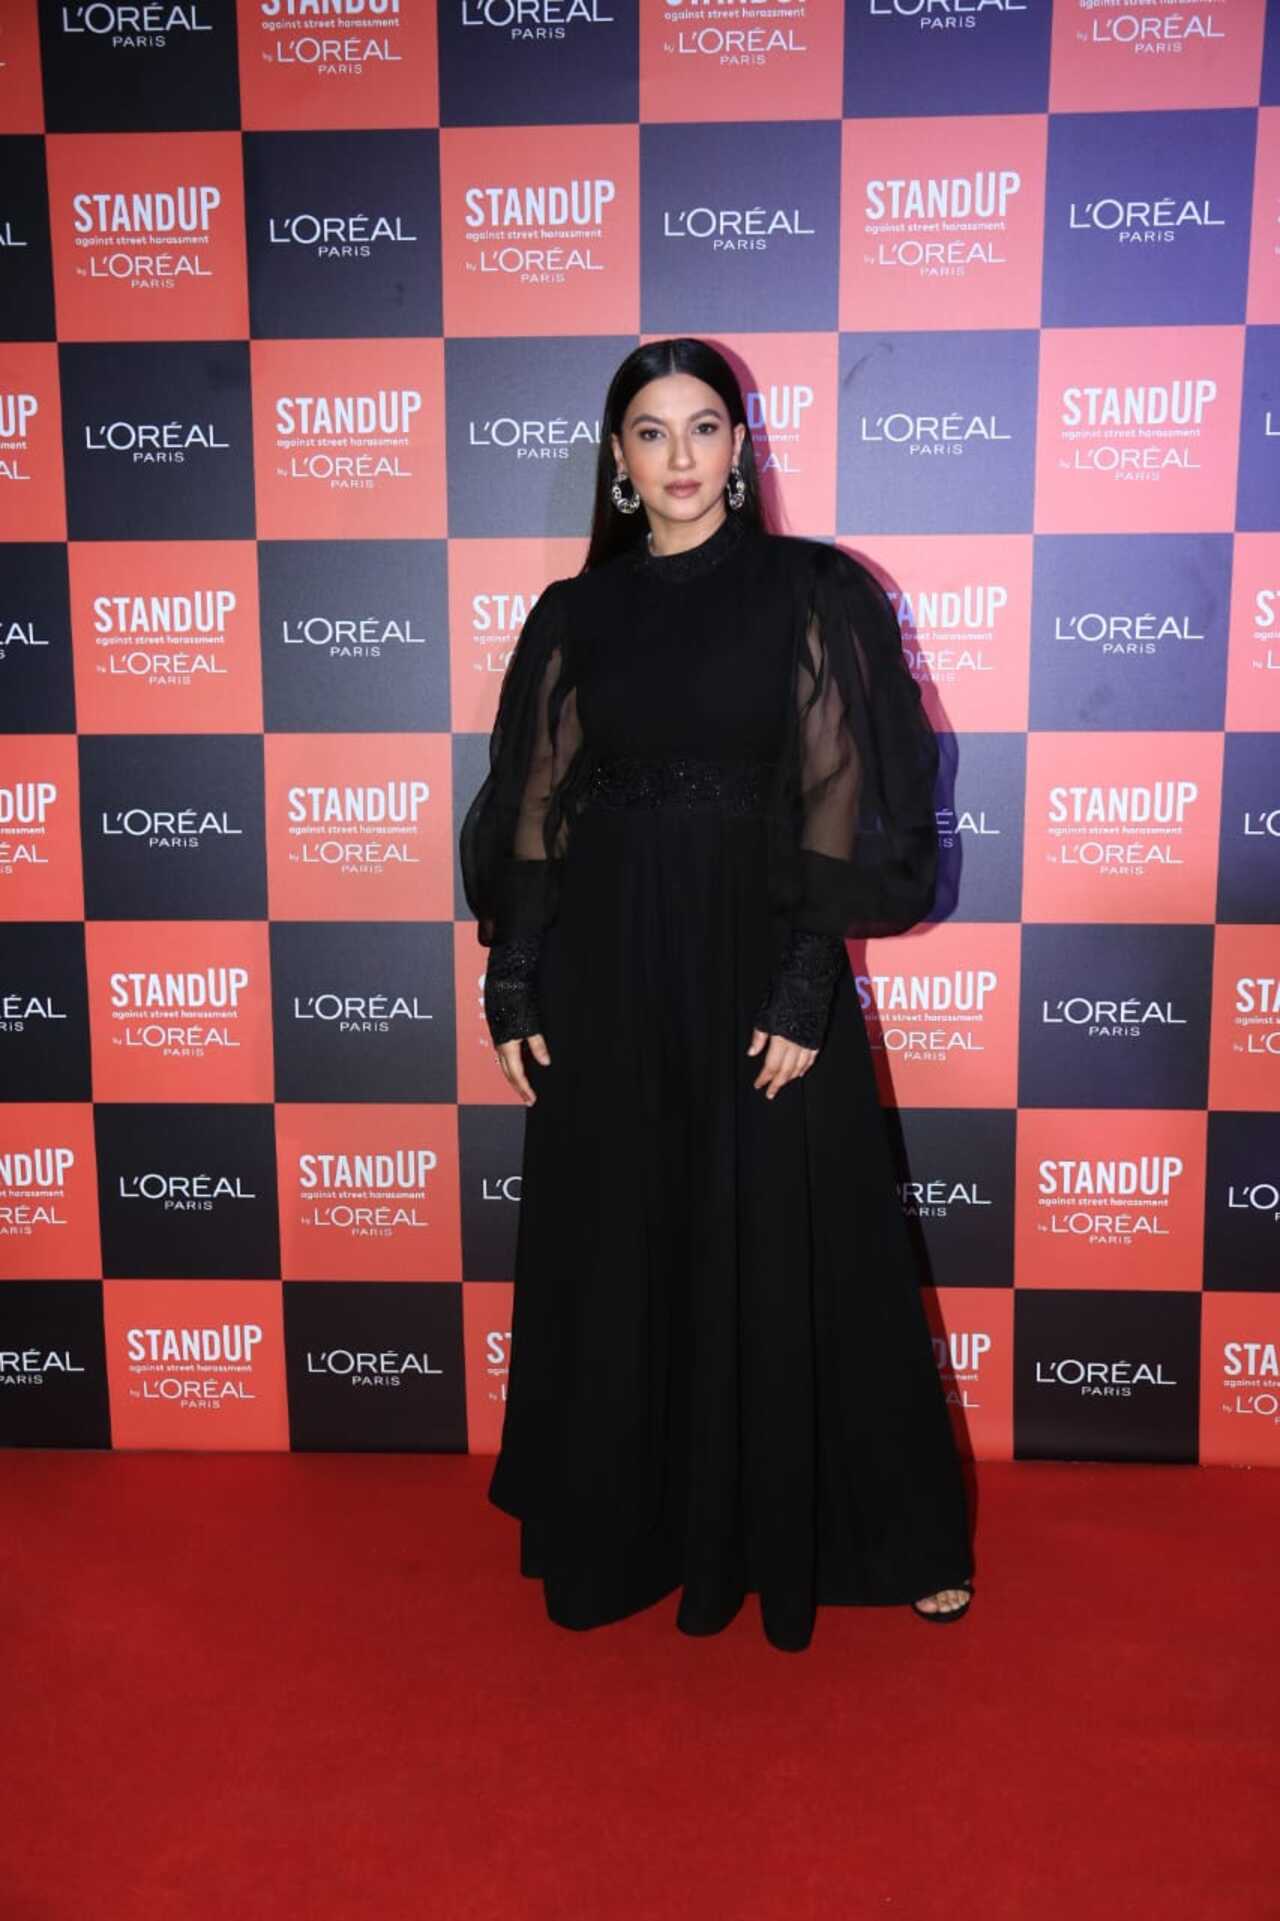 Gauahar Khan looked stunning in an all-black gown with puffy net sleeves